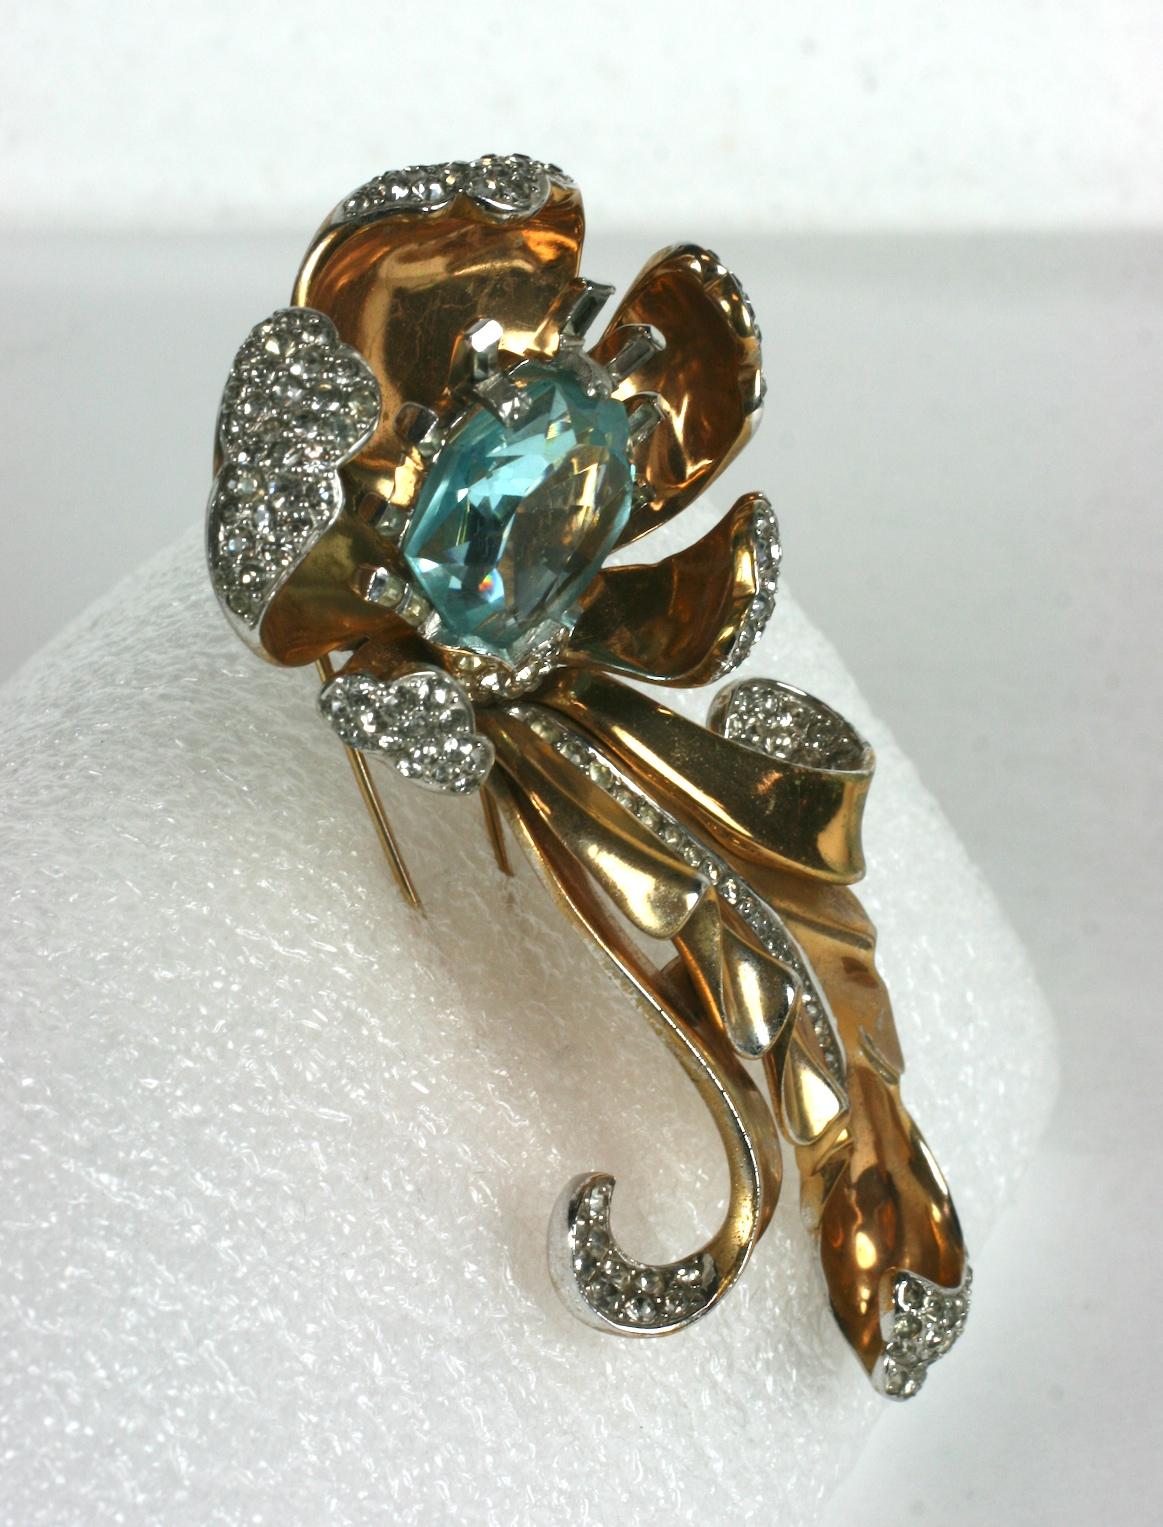 Marcel Boucher massive retro faux aquamarine floral clip brooch. Of gold over rhodium plate base metal, crystal rhinestone pave with rectangular baguette accents..
Excellent Condition, Unsigned.
Length 4.25